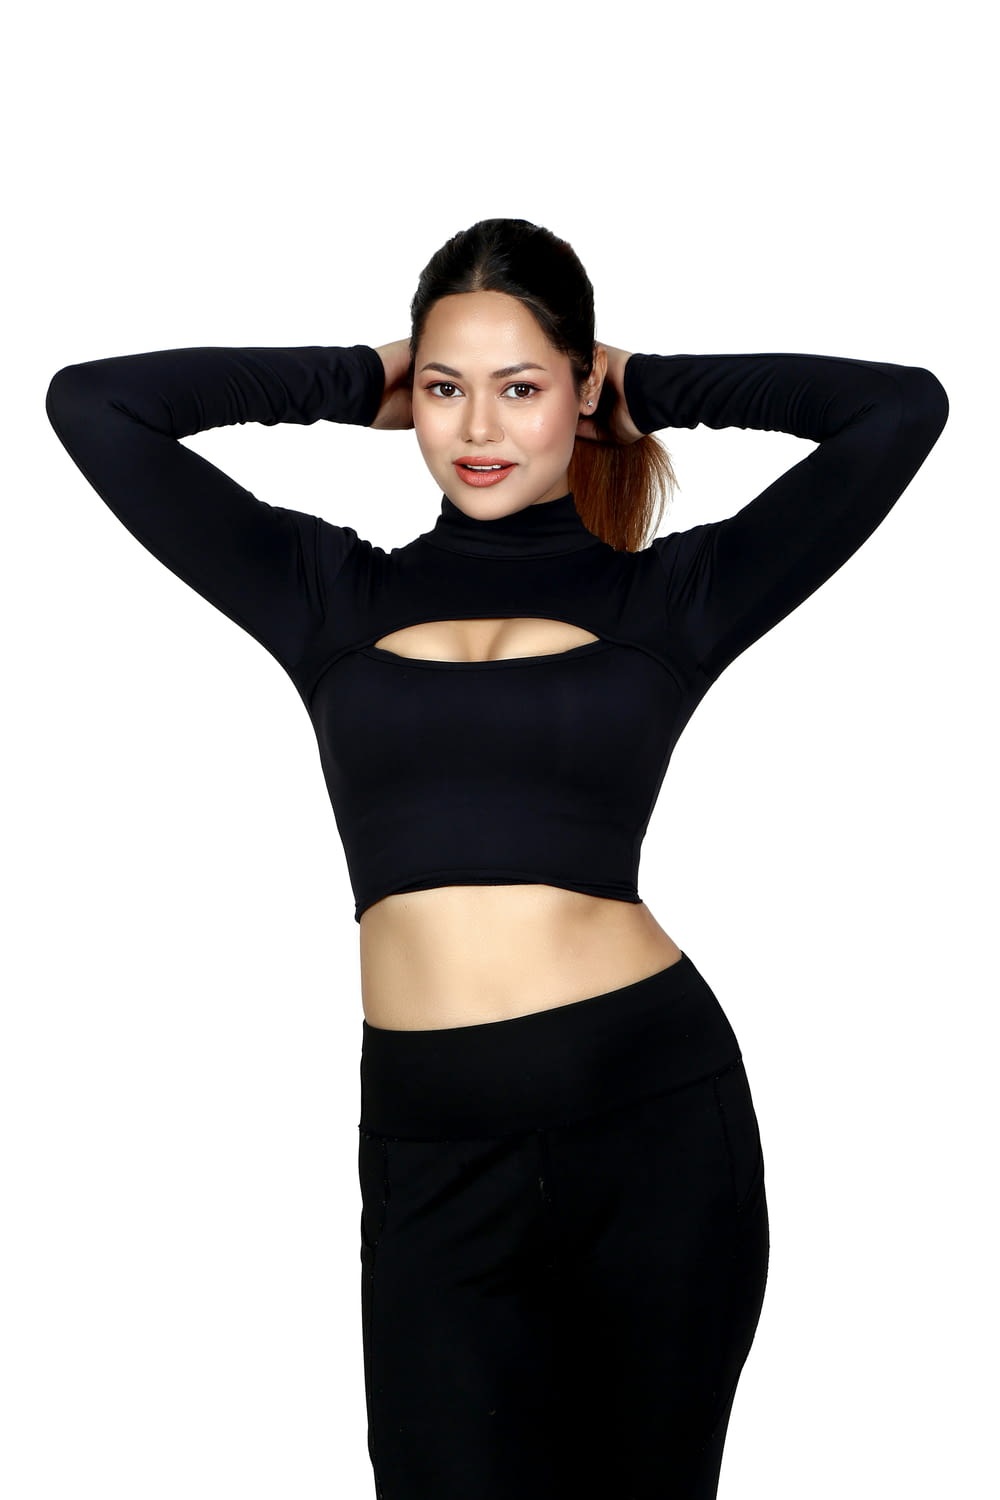 a woman in a black top and black pants